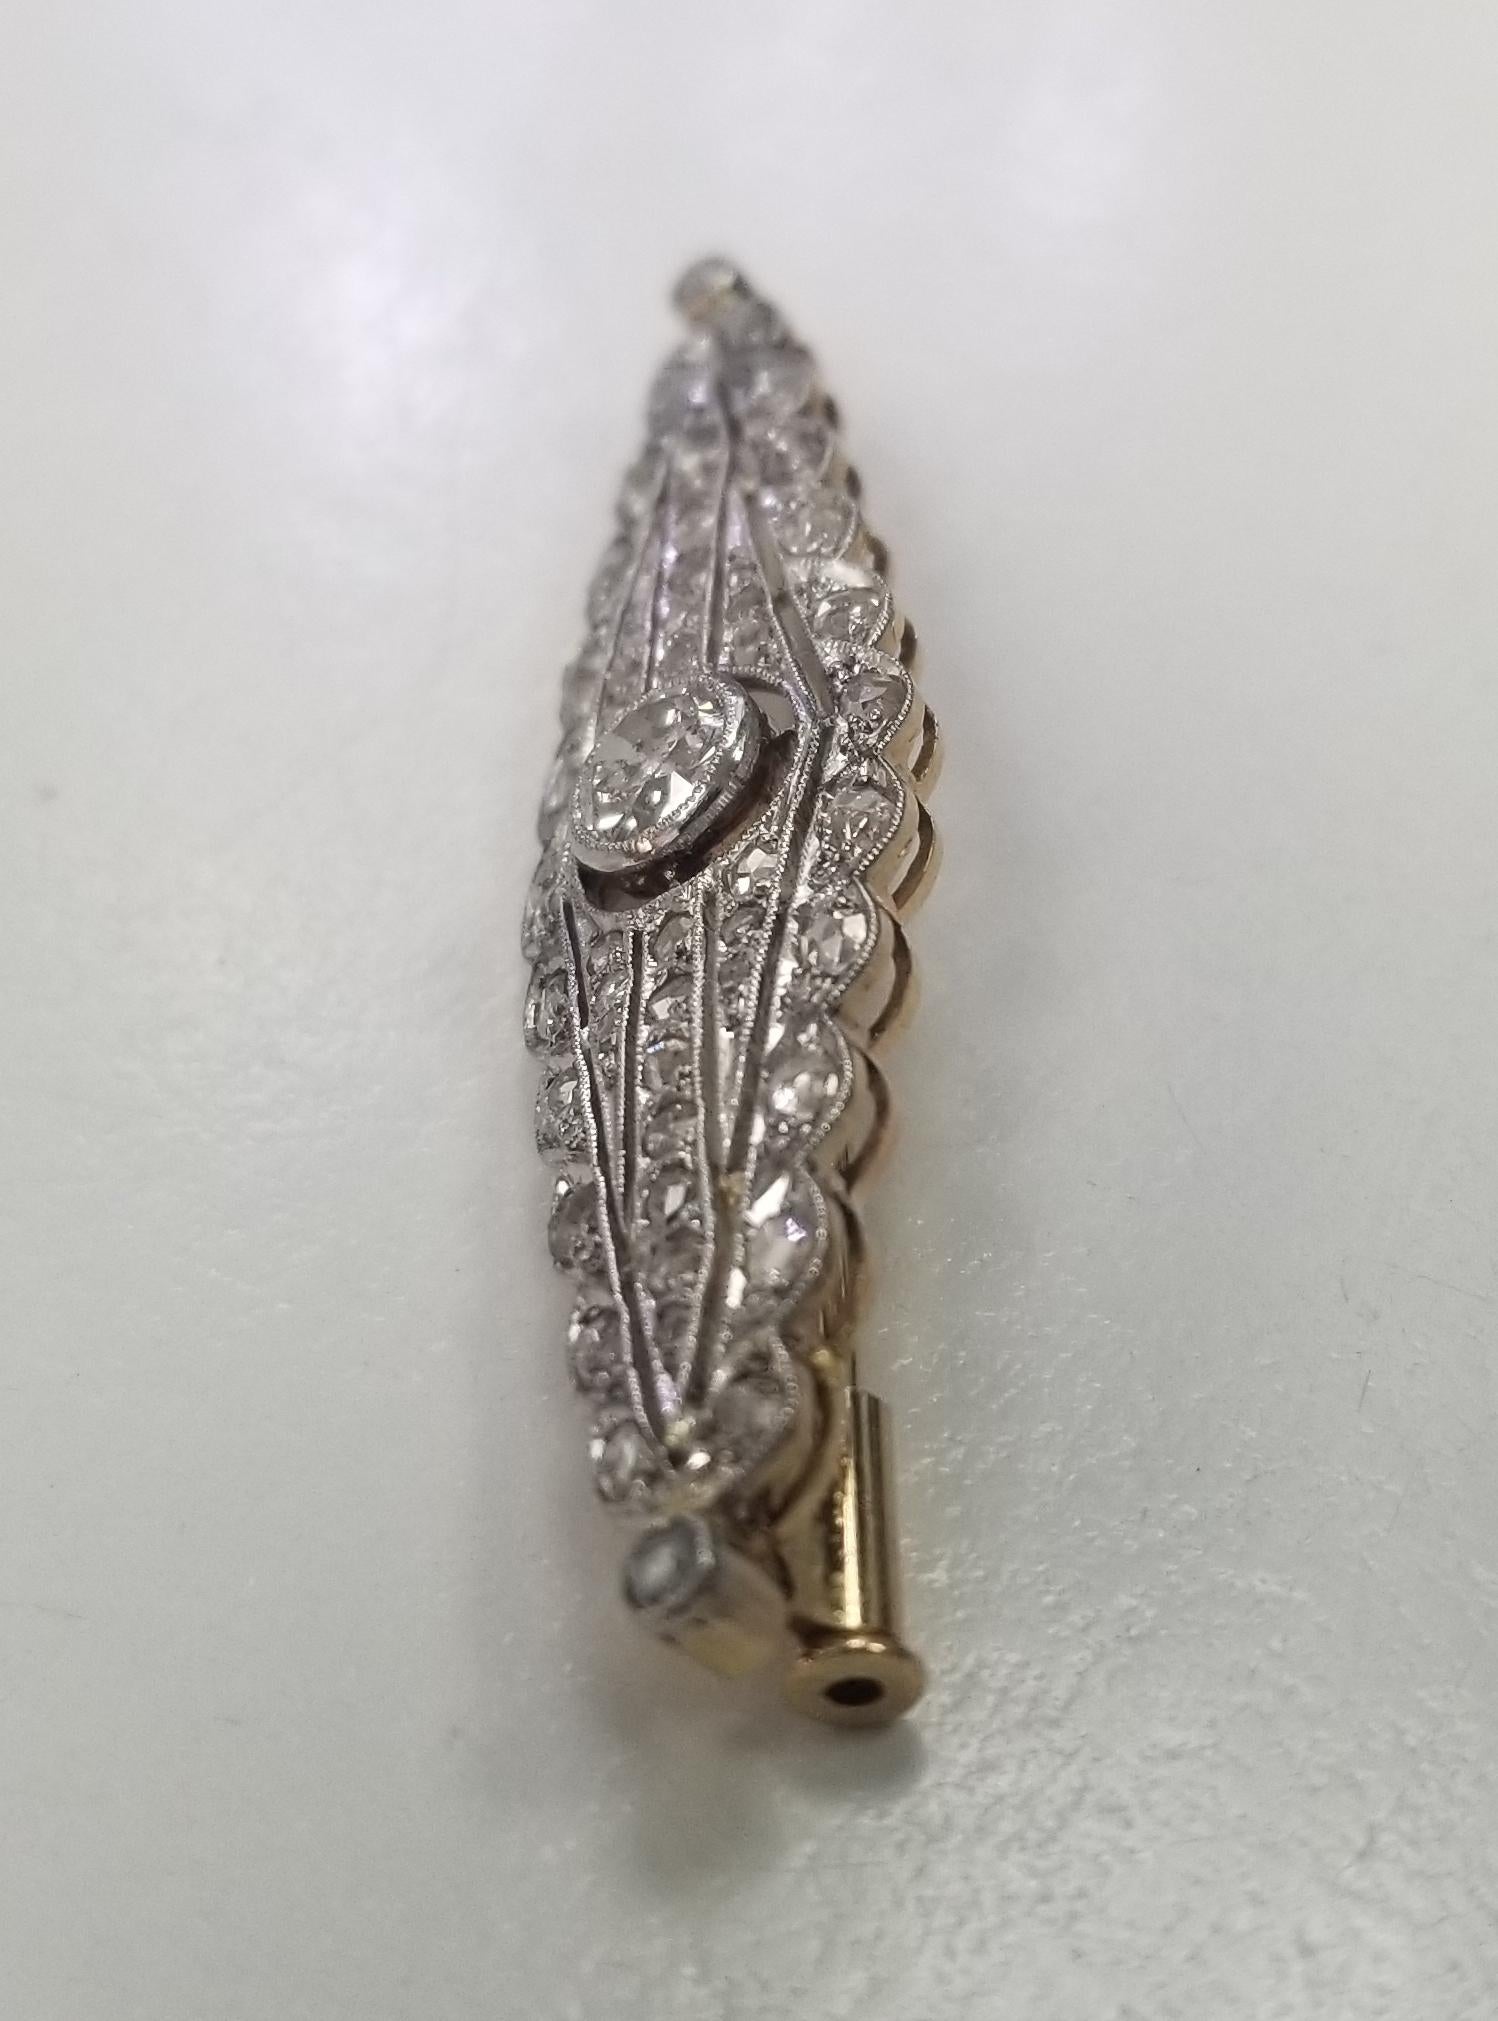  Vintage Edwardian 18k yellow Gold European and Rose Cut Diamond Brooch
Specifications:
    main stone: 1 European cut diamond approx. .50pts.   
    diamonds: 52 Rose Cut diamonds approx. .65pts.
    carat total weight: 1.15cts.
    color: G
   